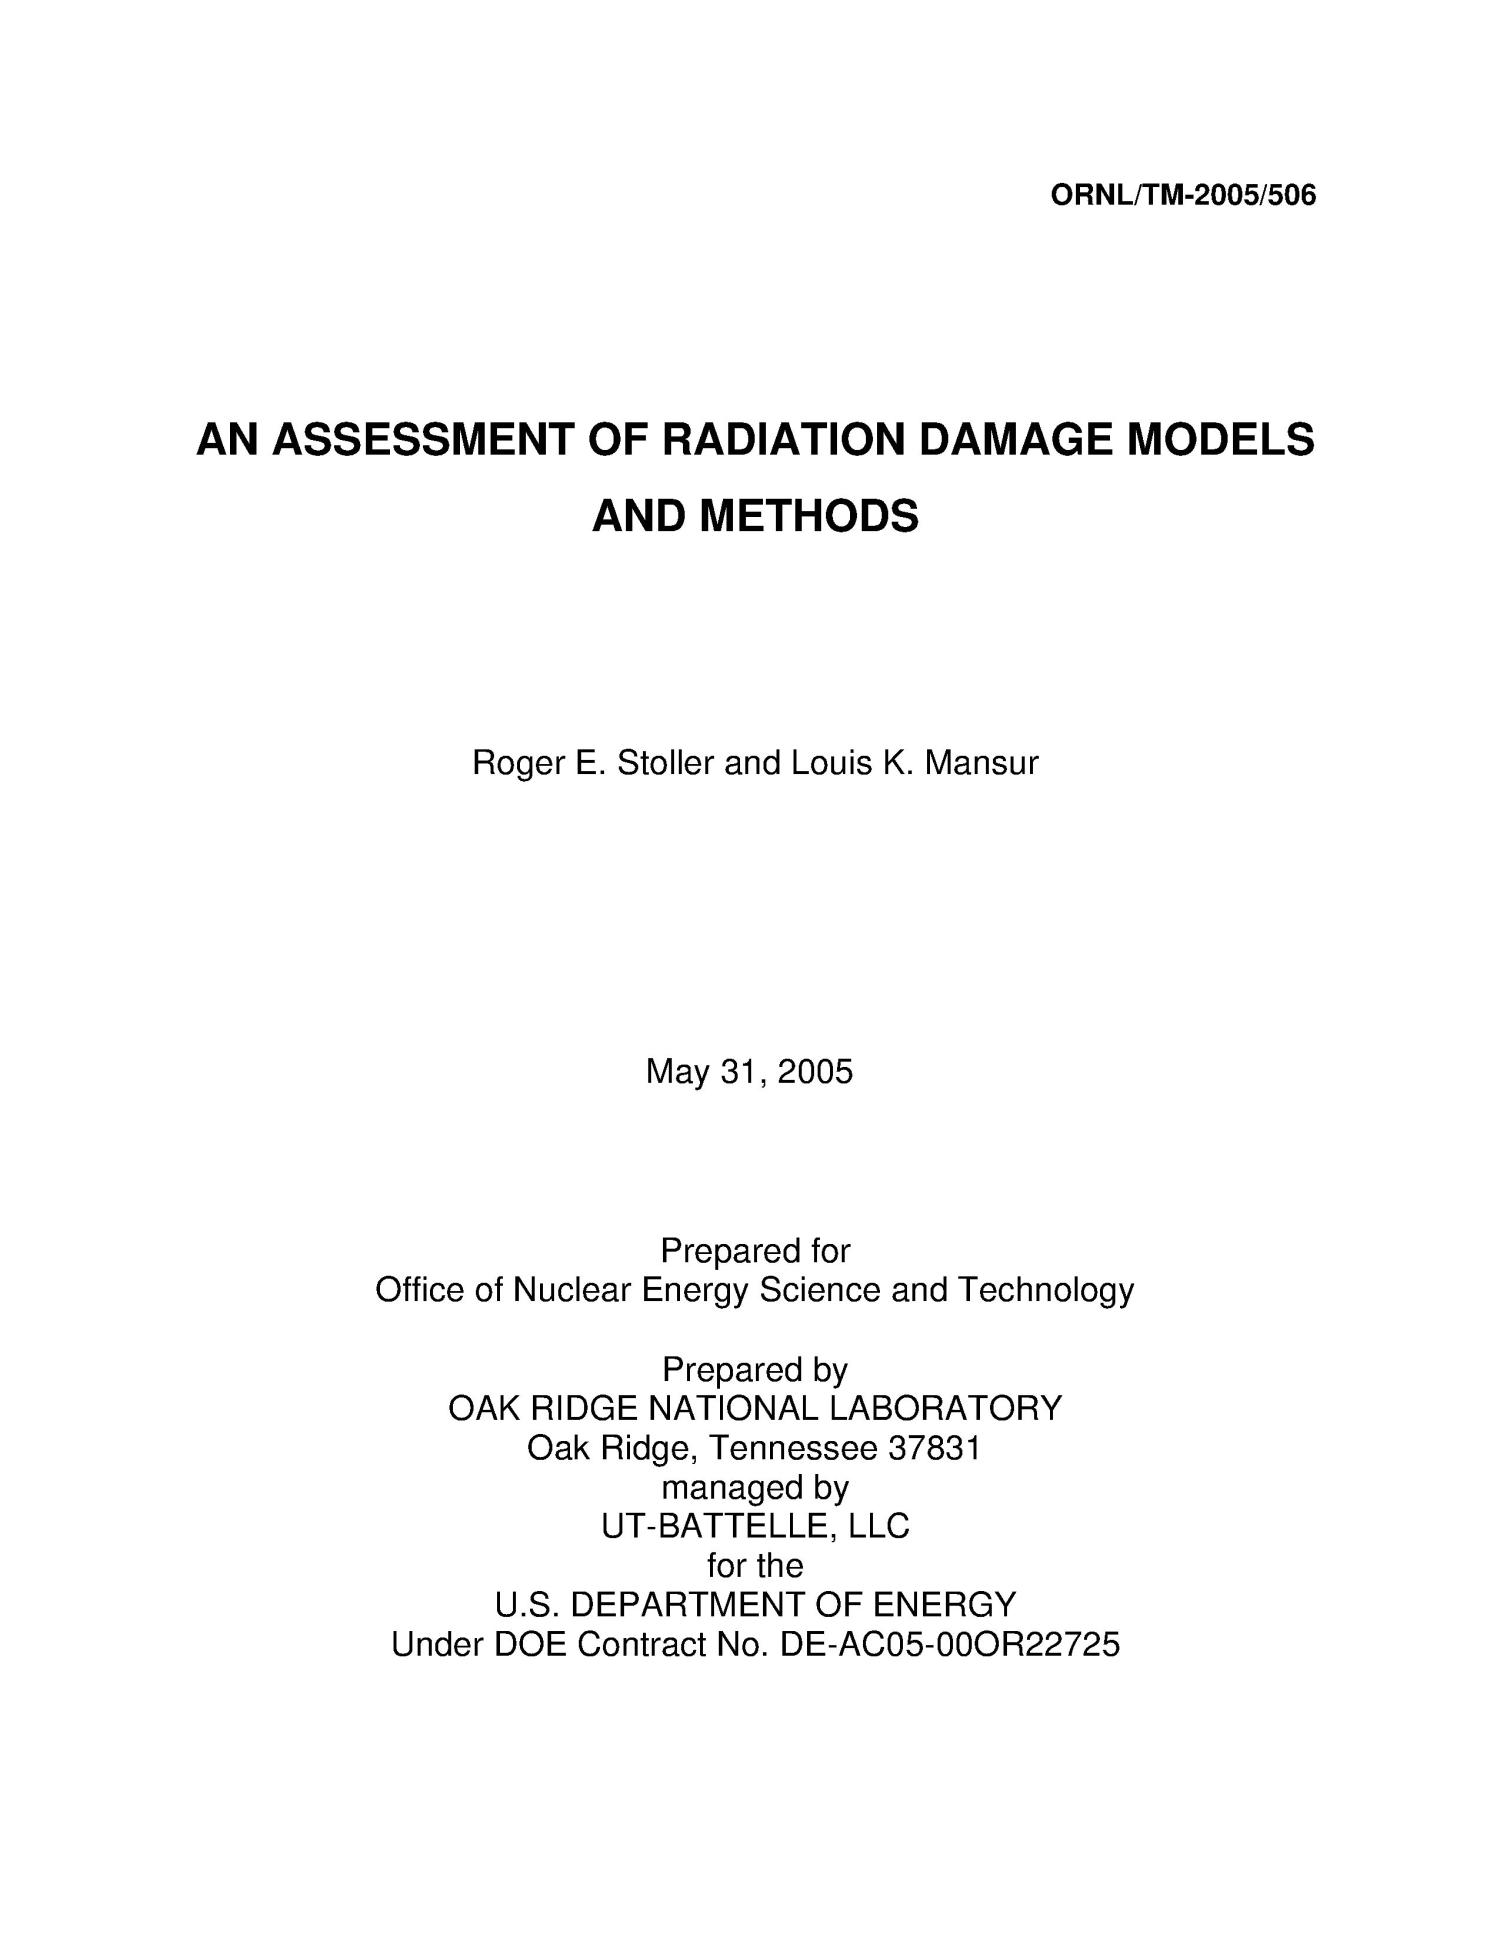 An Assessment of Radiation Damage Models and Methods
                                                
                                                    [Sequence #]: 2 of 39
                                                